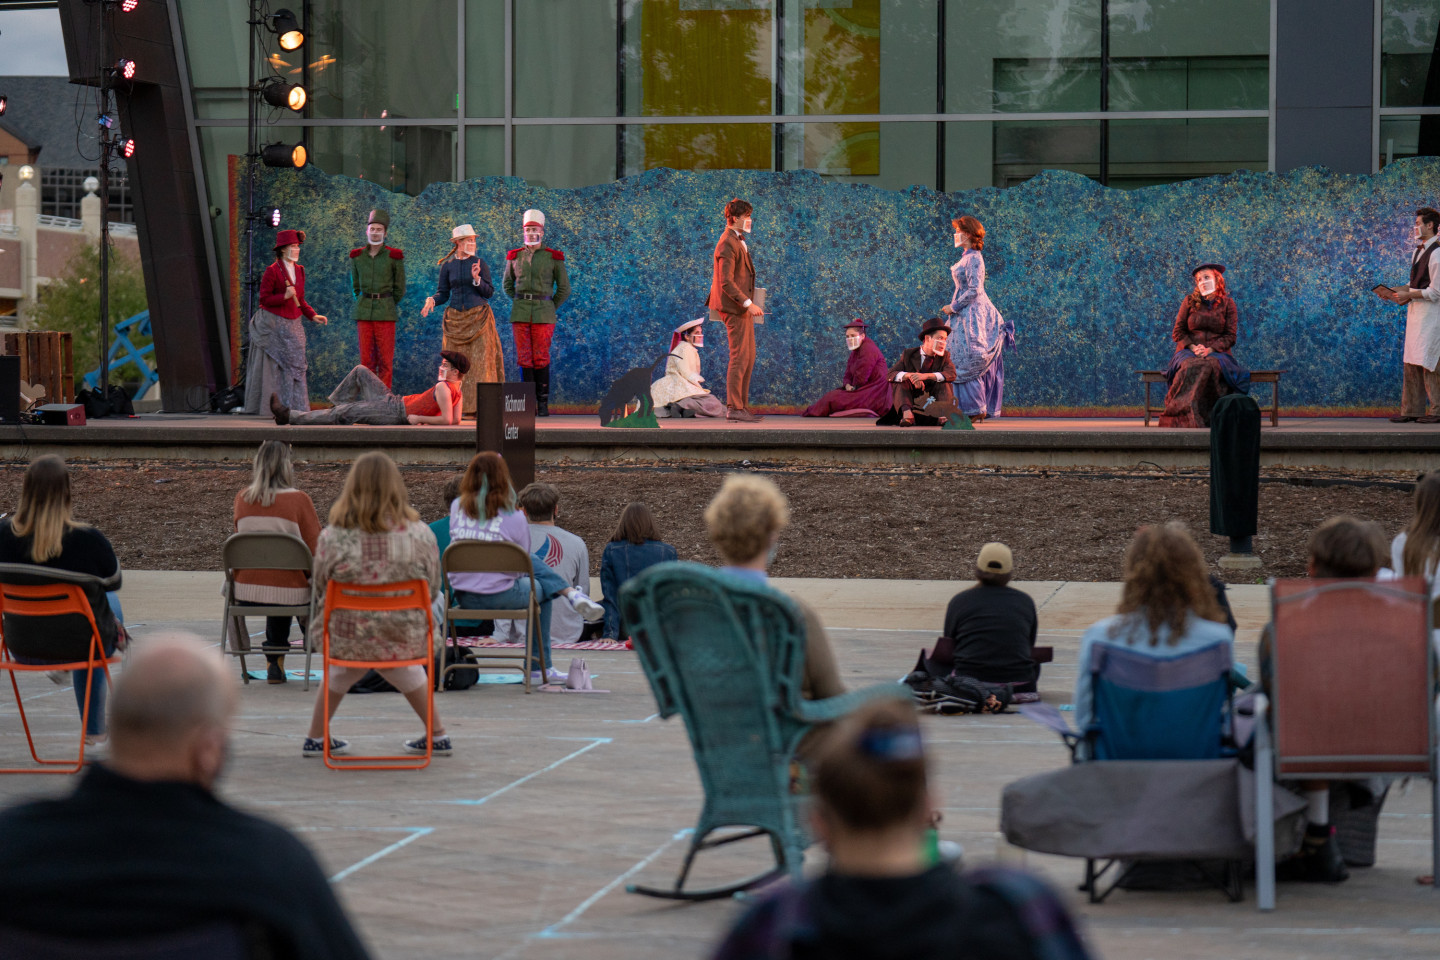 A socially distanced crowd watches actors wearing masks perform on an outdoor stage.